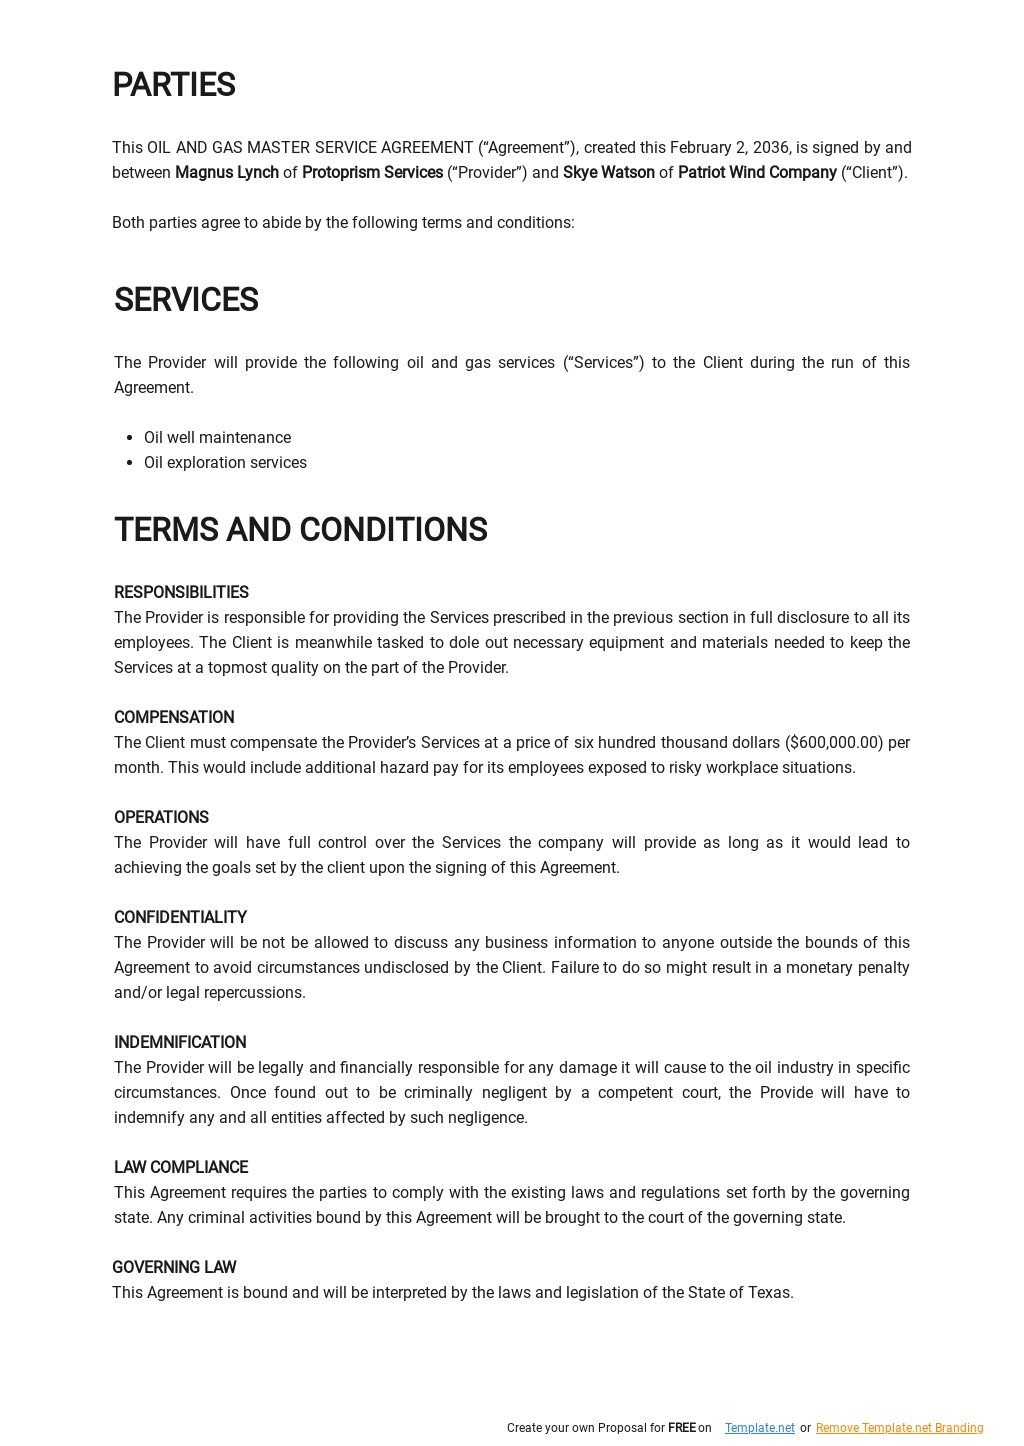 Oil and Gas Master Service Agreement Template 1.jpe